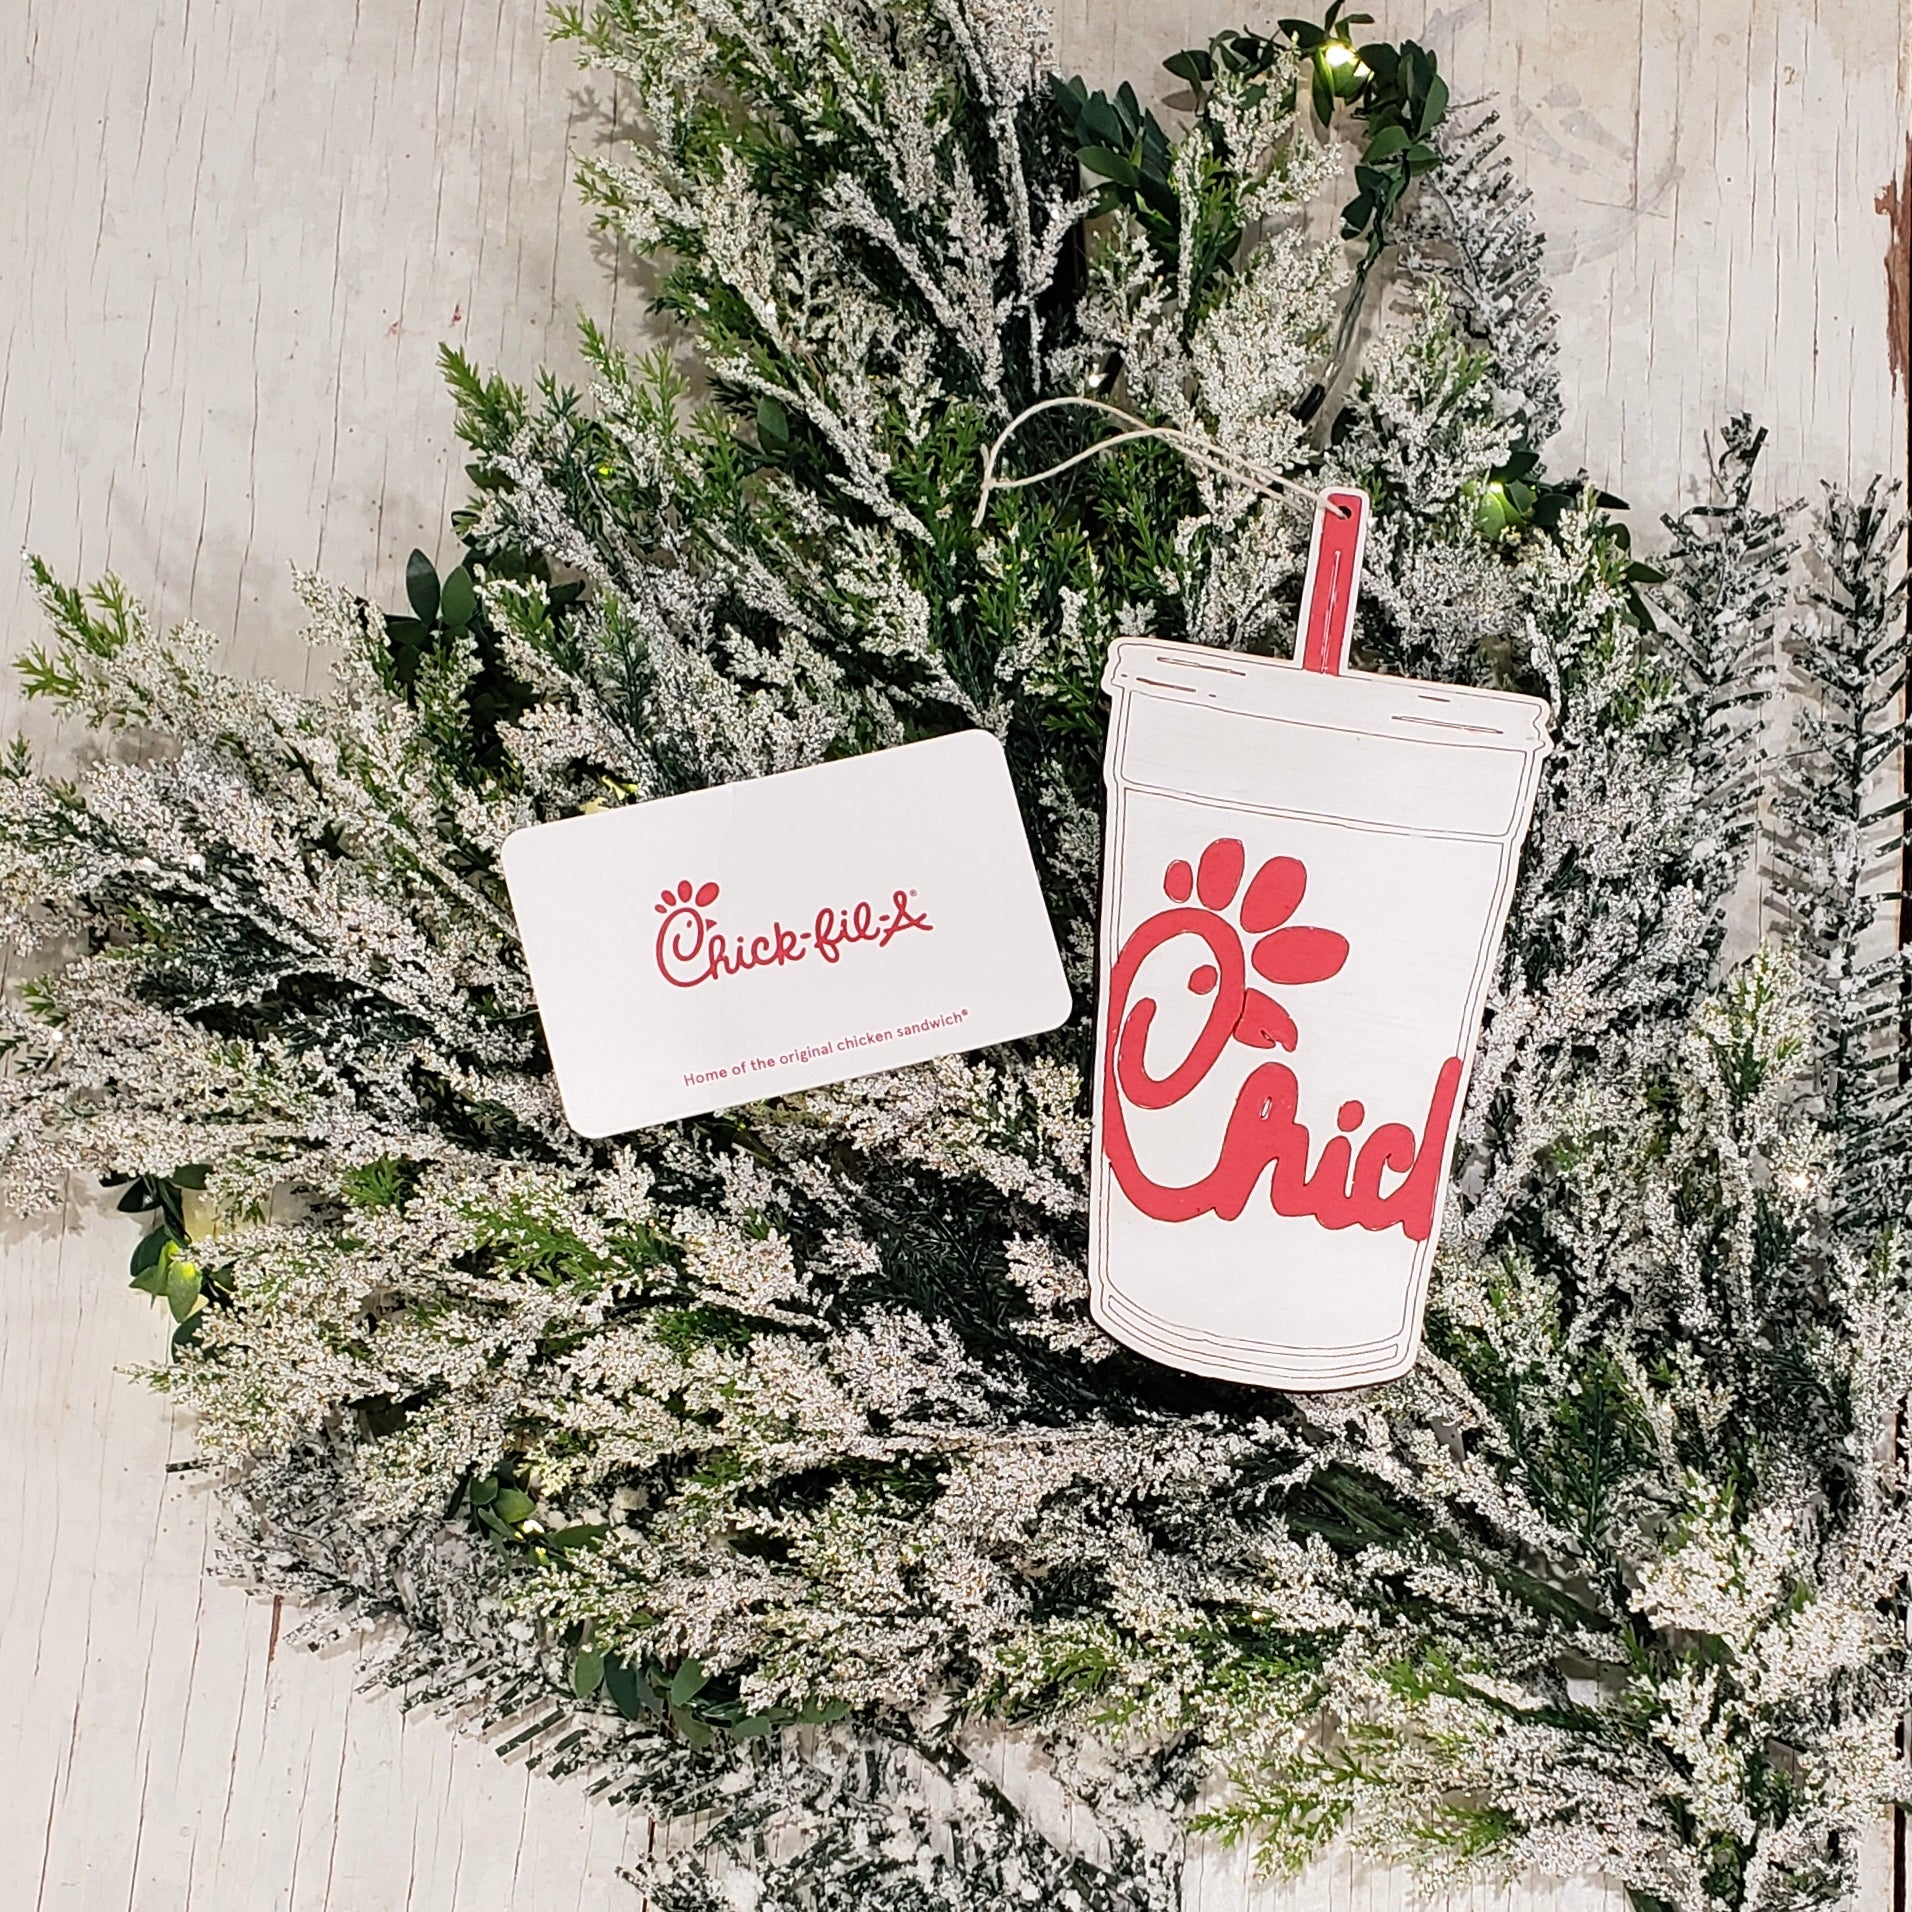 Who else loves @Chick-fil-A ? Does yours have an ornament